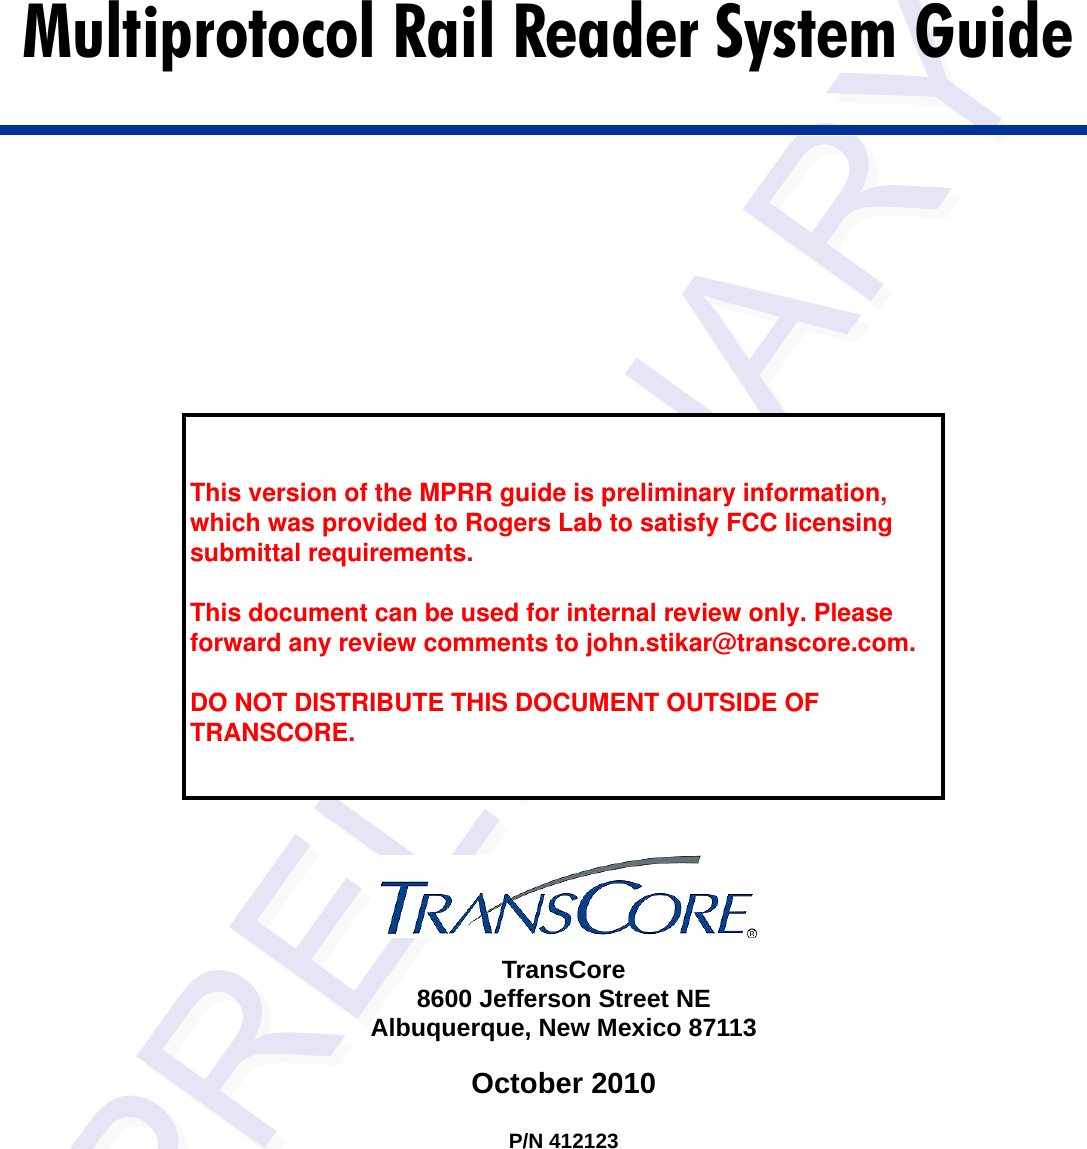 TransCore8600 Jefferson Street NEAlbuquerque, New Mexico 87113October 2010P/N 412123Multiprotocol Rail Reader System Guide  This version of the MPRR guide is preliminary information, which was provided to Rogers Lab to satisfy FCC licensing submittal requirements.   This document can be used for internal review only. Please forward any review comments to john.stikar@transcore.com.  DO NOT DISTRIBUTE THIS DOCUMENT OUTSIDE OF TRANSCORE. 